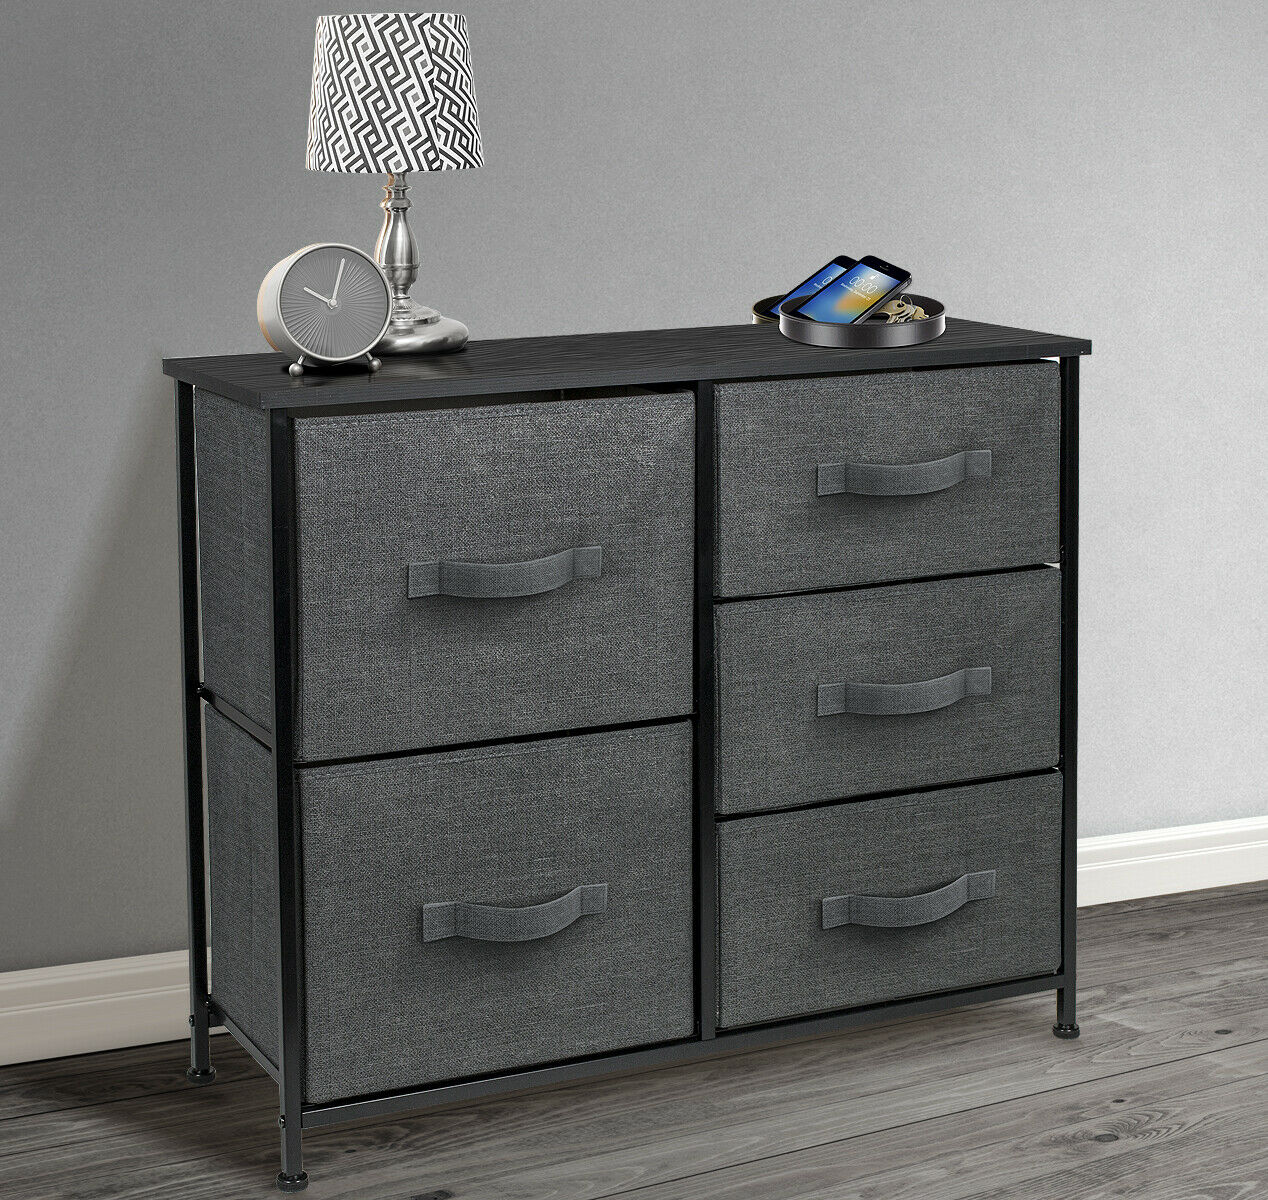 BlushBees® Dresser with 5 Drawers - Furniture Storage Tower Unit for Bedroom